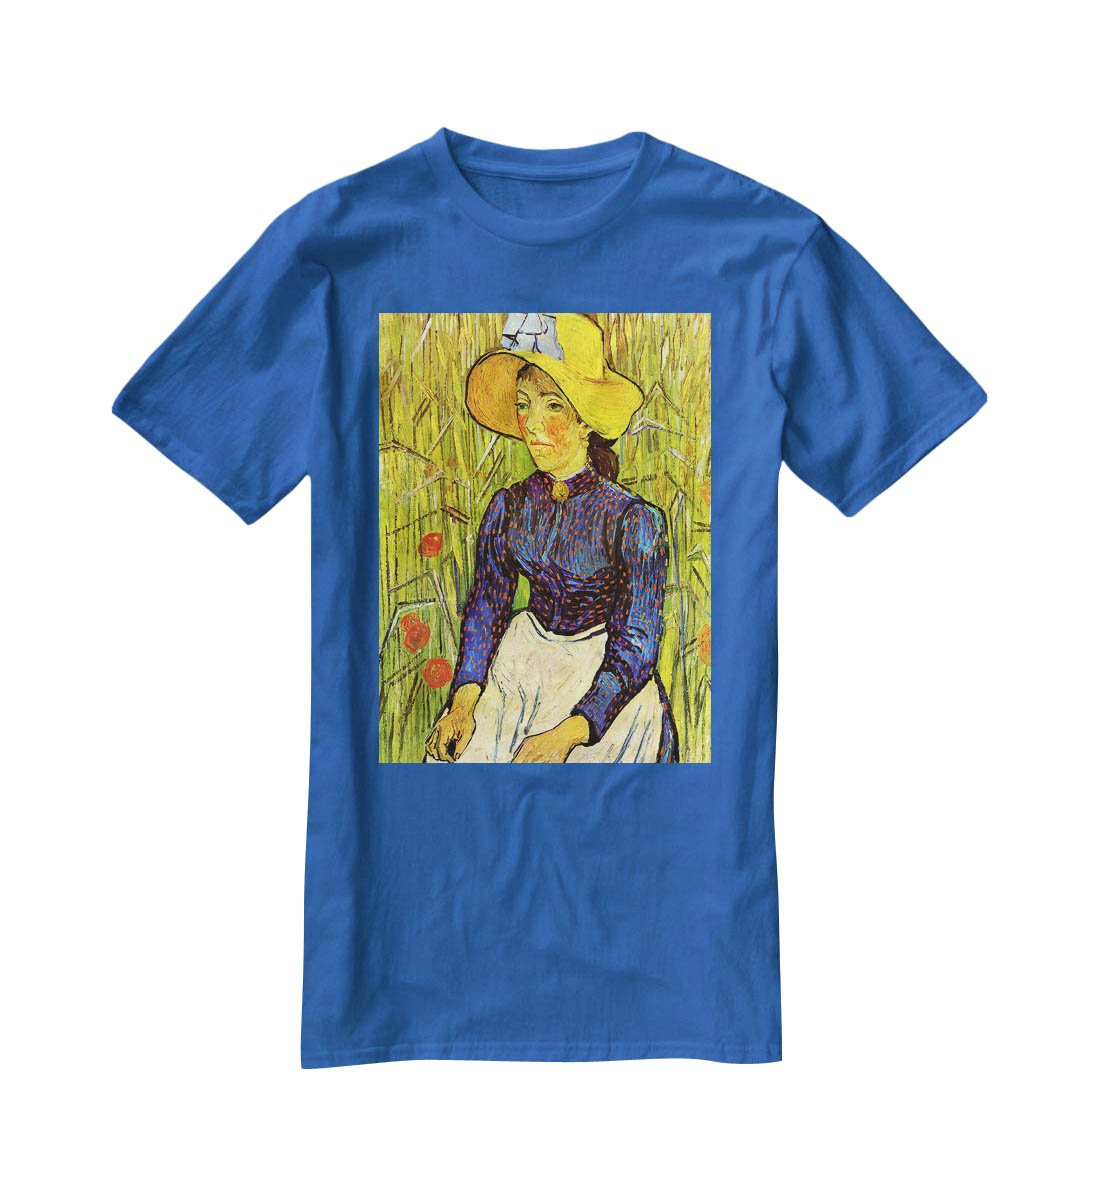 Young Peasant Woman with Straw Hat Sitting in the Wheat by Van Gogh T-Shirt - Canvas Art Rocks - 2